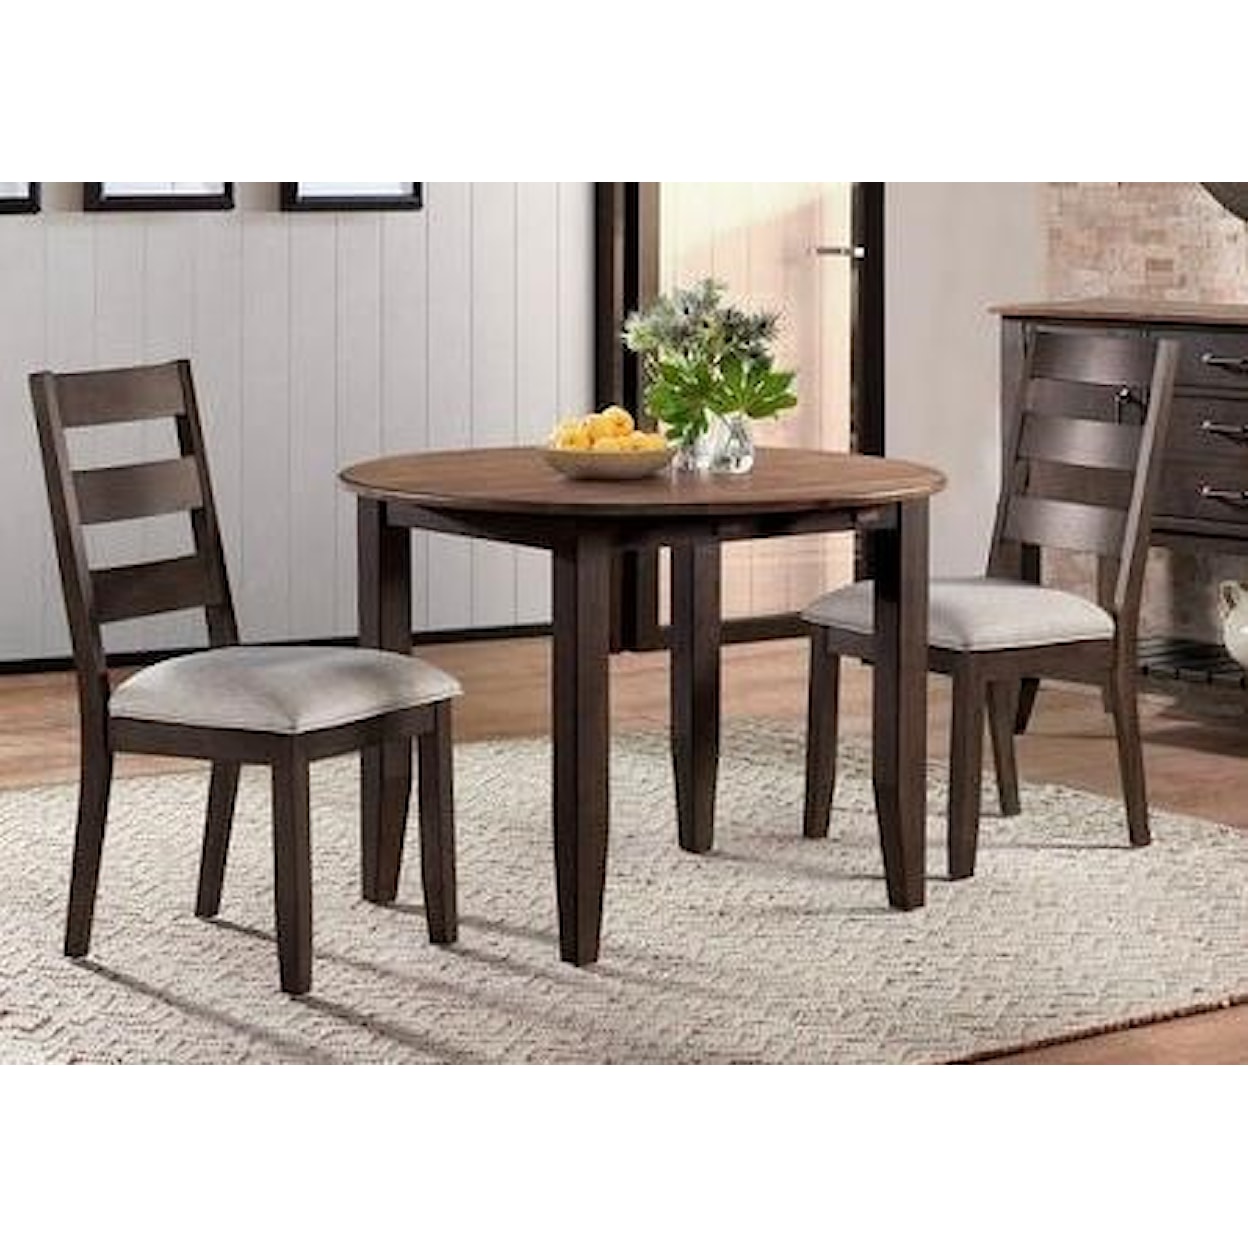 Intercon Beacon 3-Piece Table and Chair Set